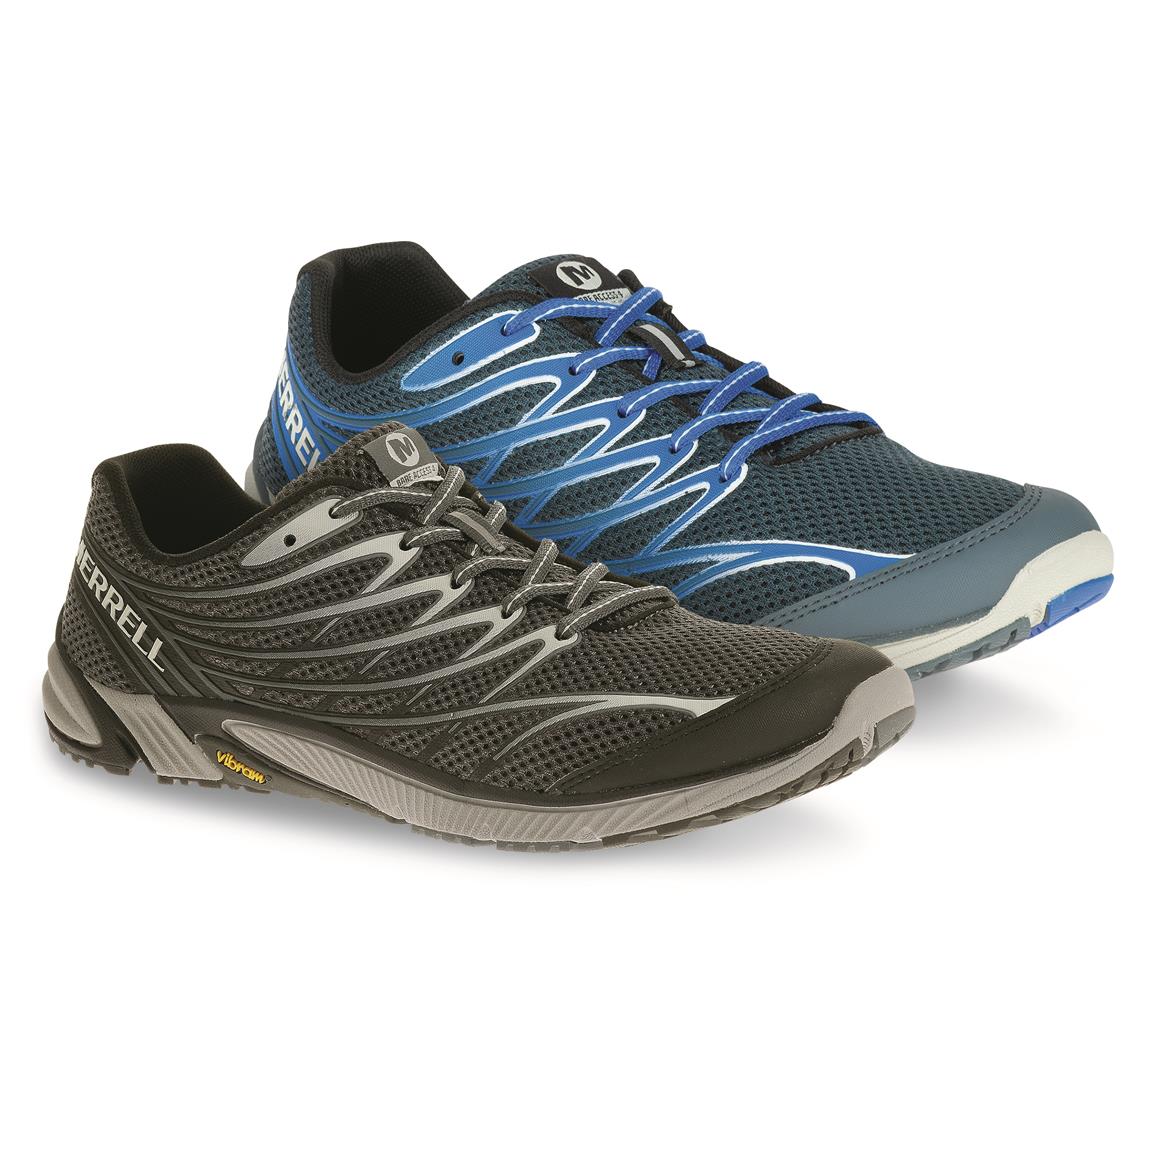 Merrell Men's Bare Access 4 Trail Running Shoes - 676013, Hiking Boots ...